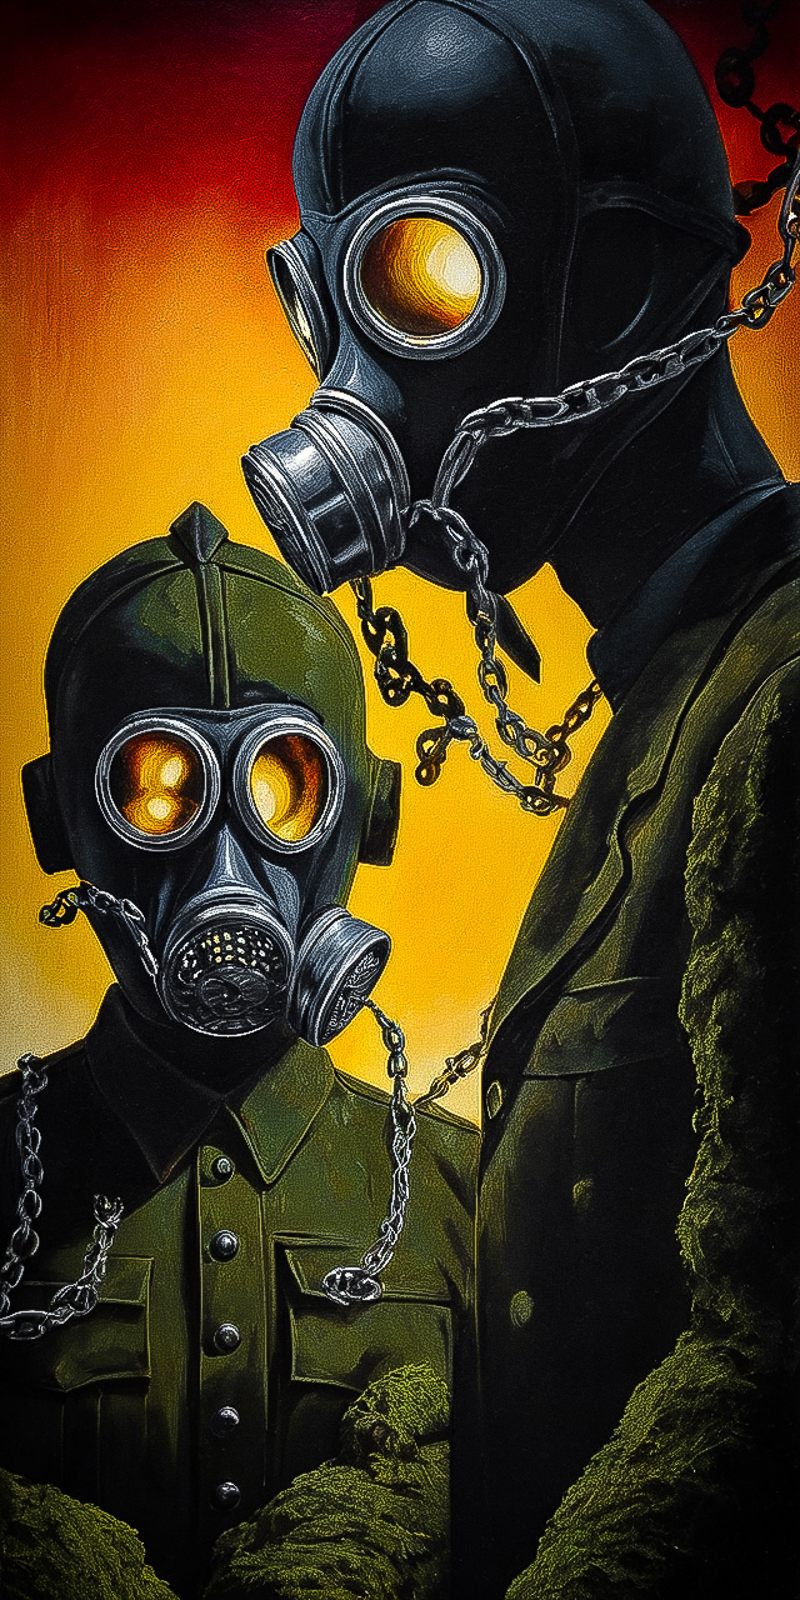 A painting of a person wearing a gas mask, chained to another person and a chain.